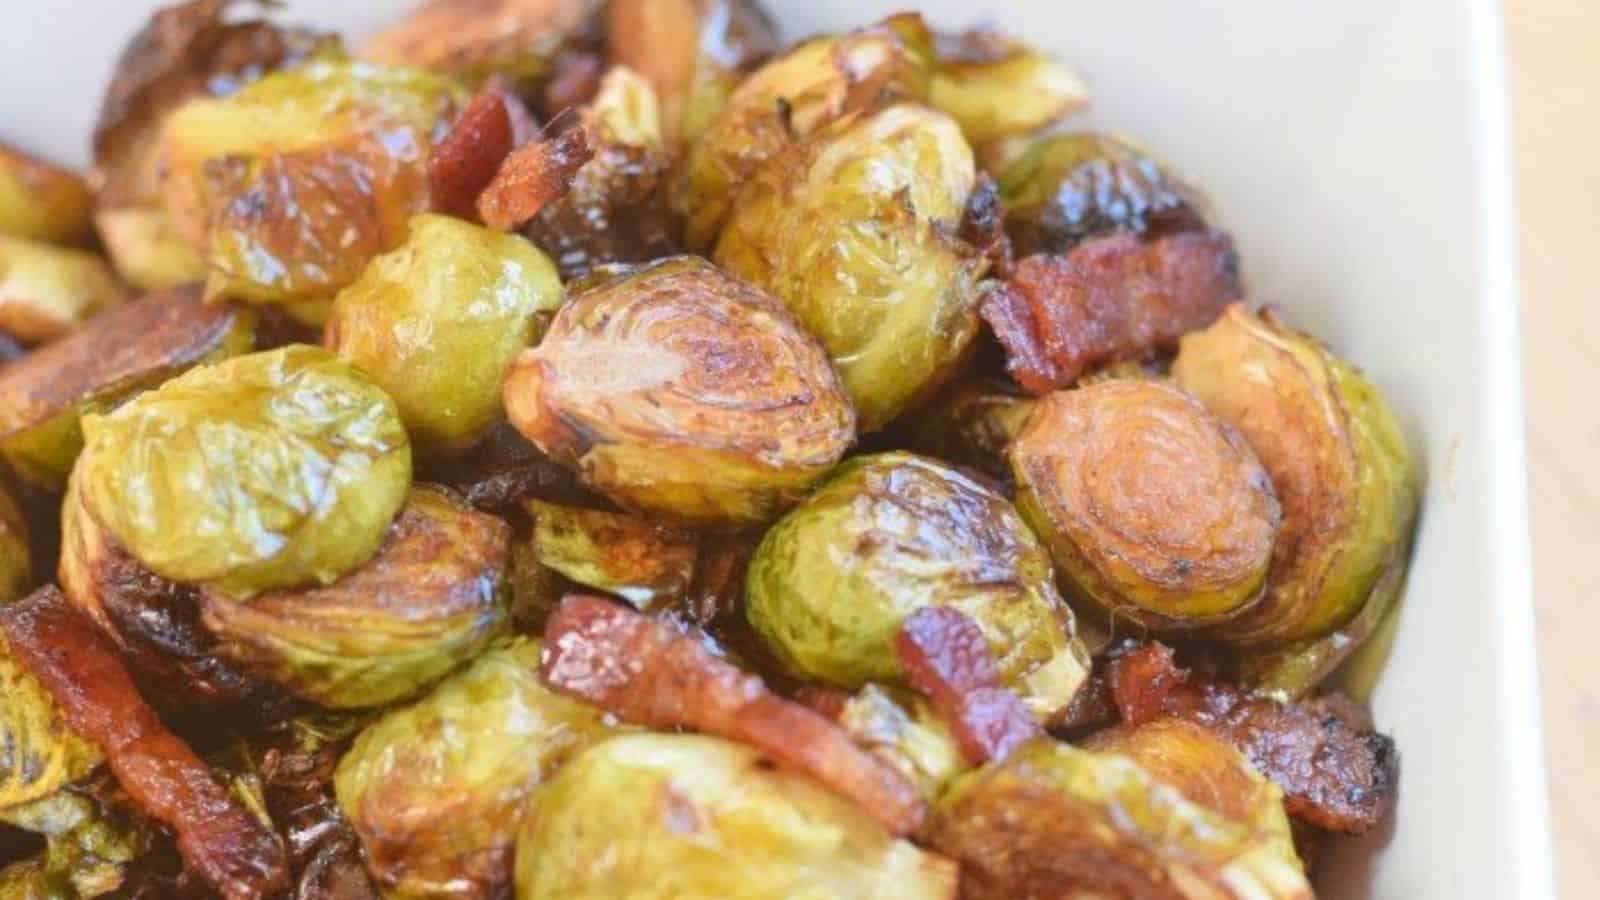 Roasted brussels sprouts with caramelized edges in a serving dish.